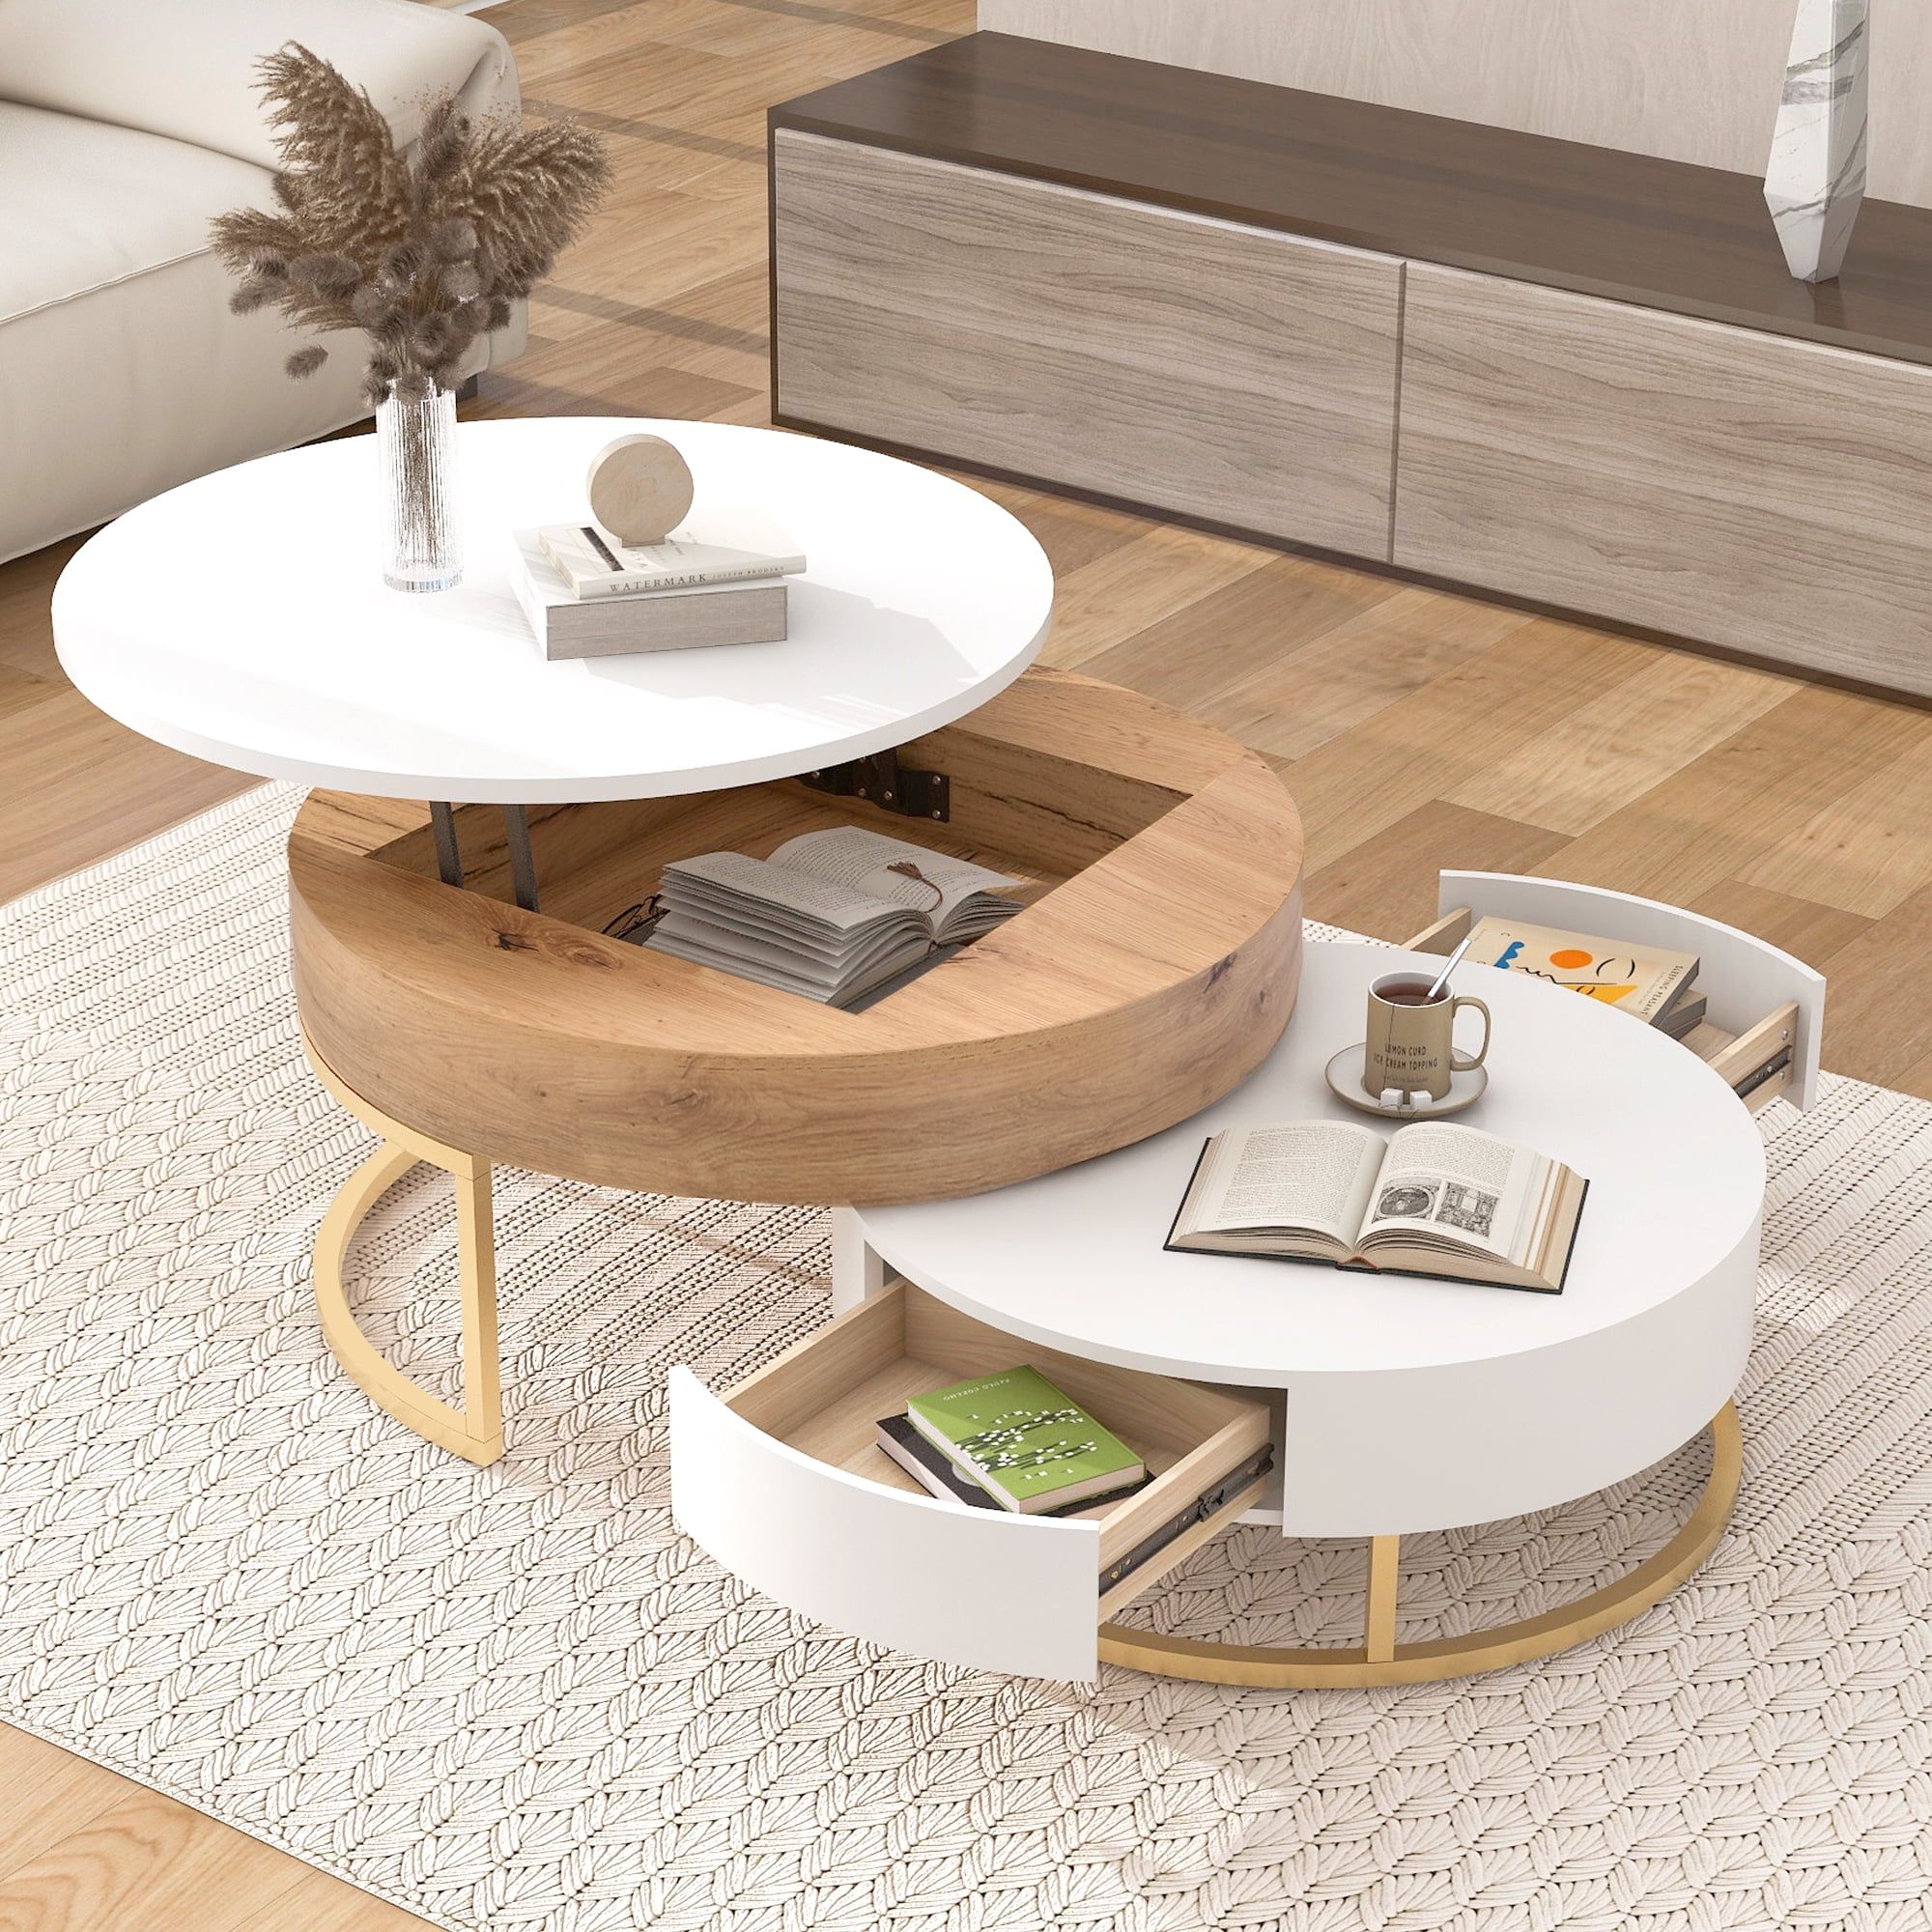 Churanty Gold Round Nesting Coffee Table Set Of 2, Modern Lift Top Coffee  Table With Storage Drawers For Small Spaces,natural Wood – Walmart Intended For Lift Top Coffee Tables With Storage Drawers (View 11 of 15)